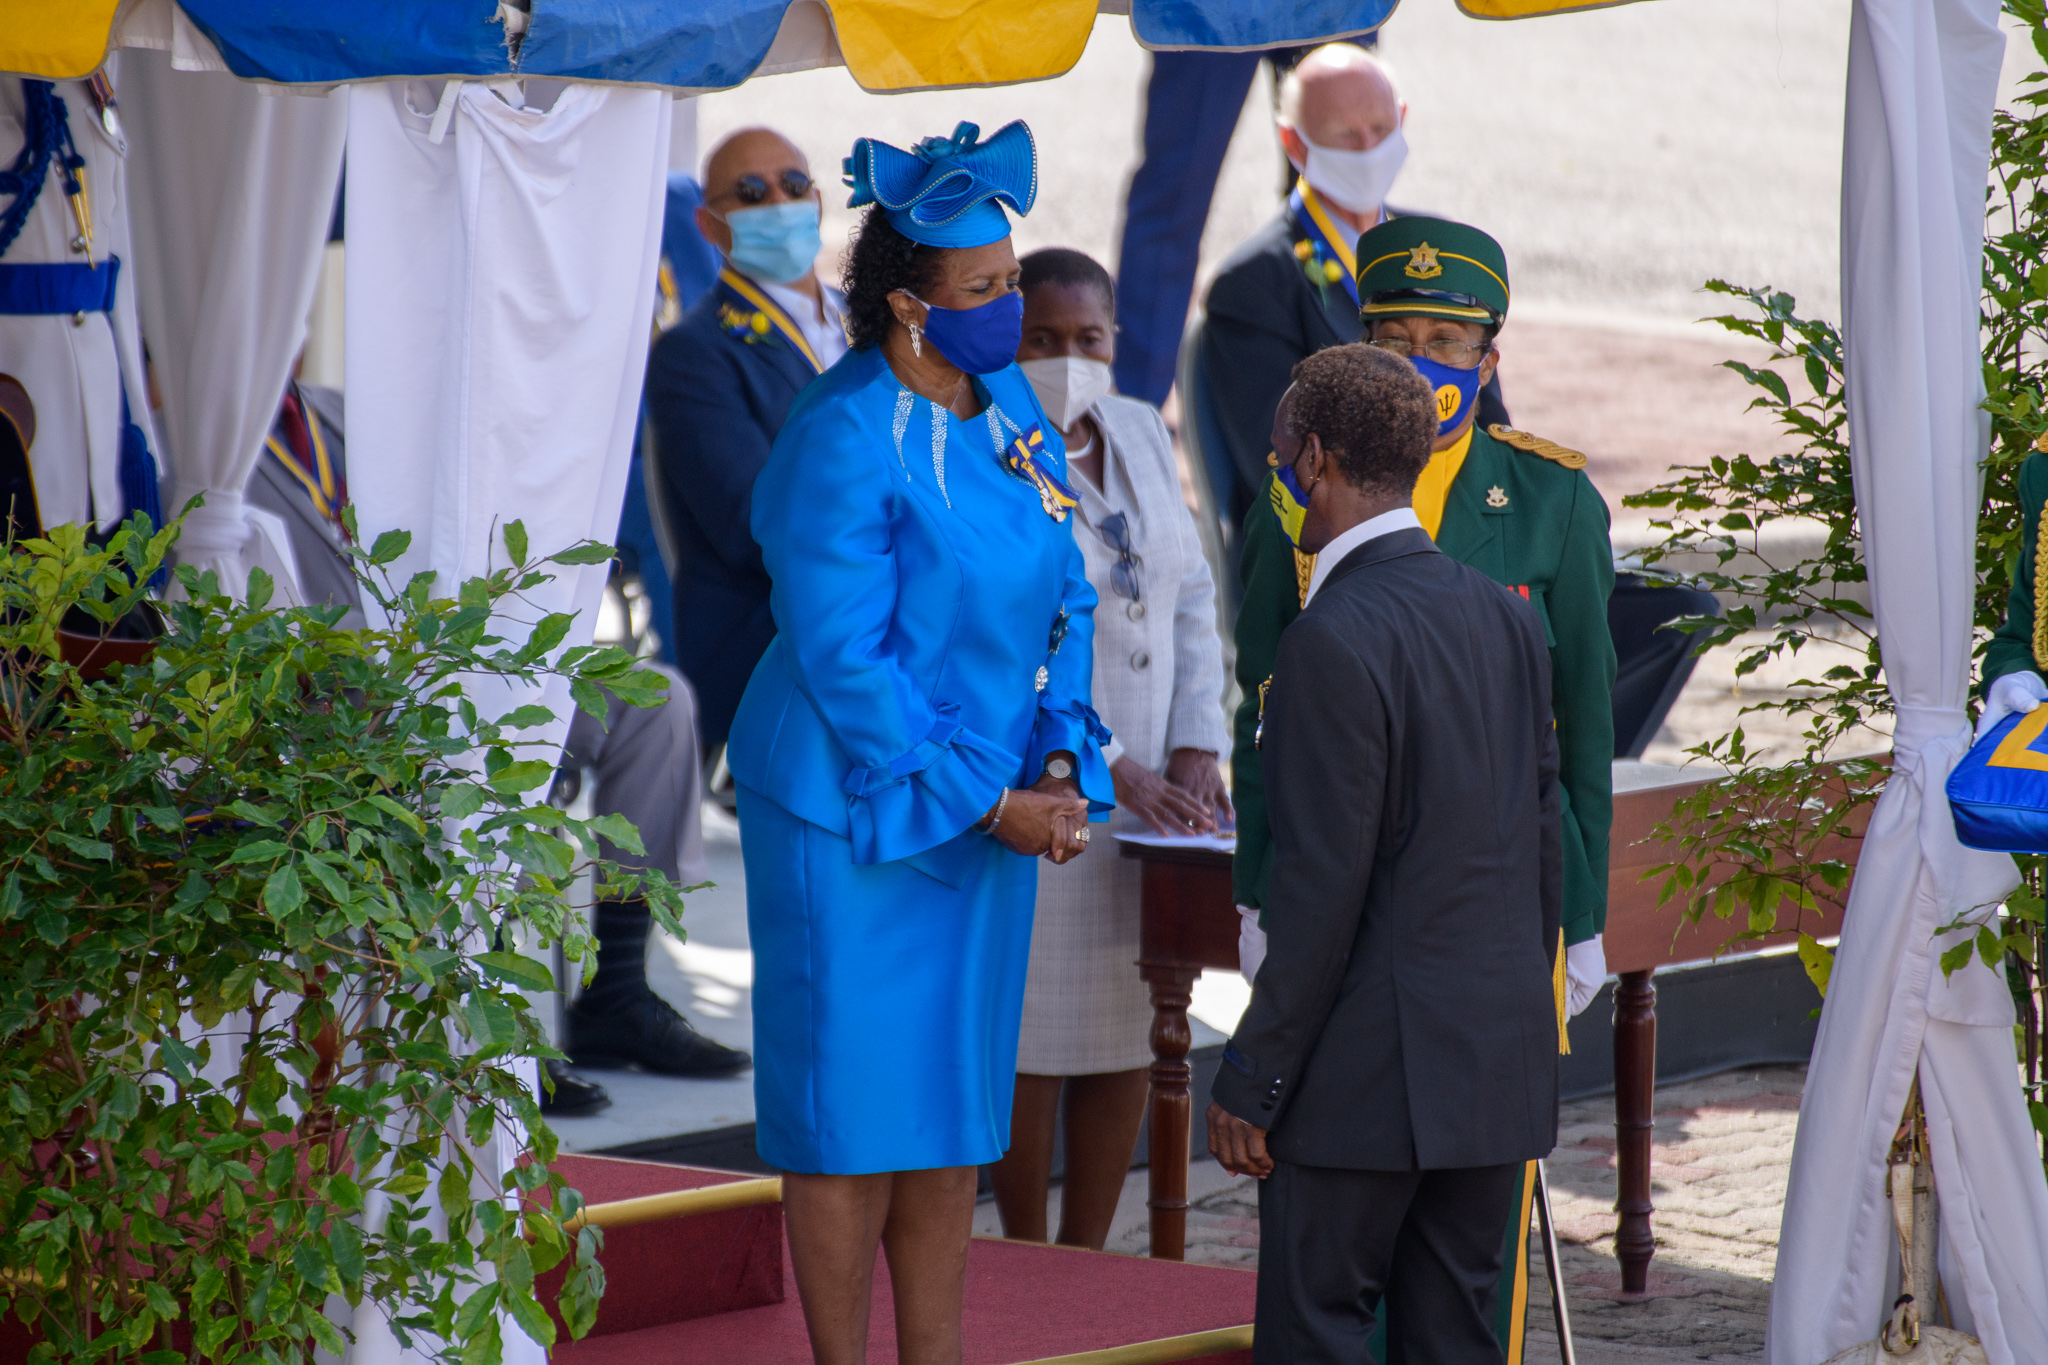 Then Governor-General Sandra Mason presents awards during the 2020 Independence Day Parade. In 2021 she would become Barbados's first President as a republic.